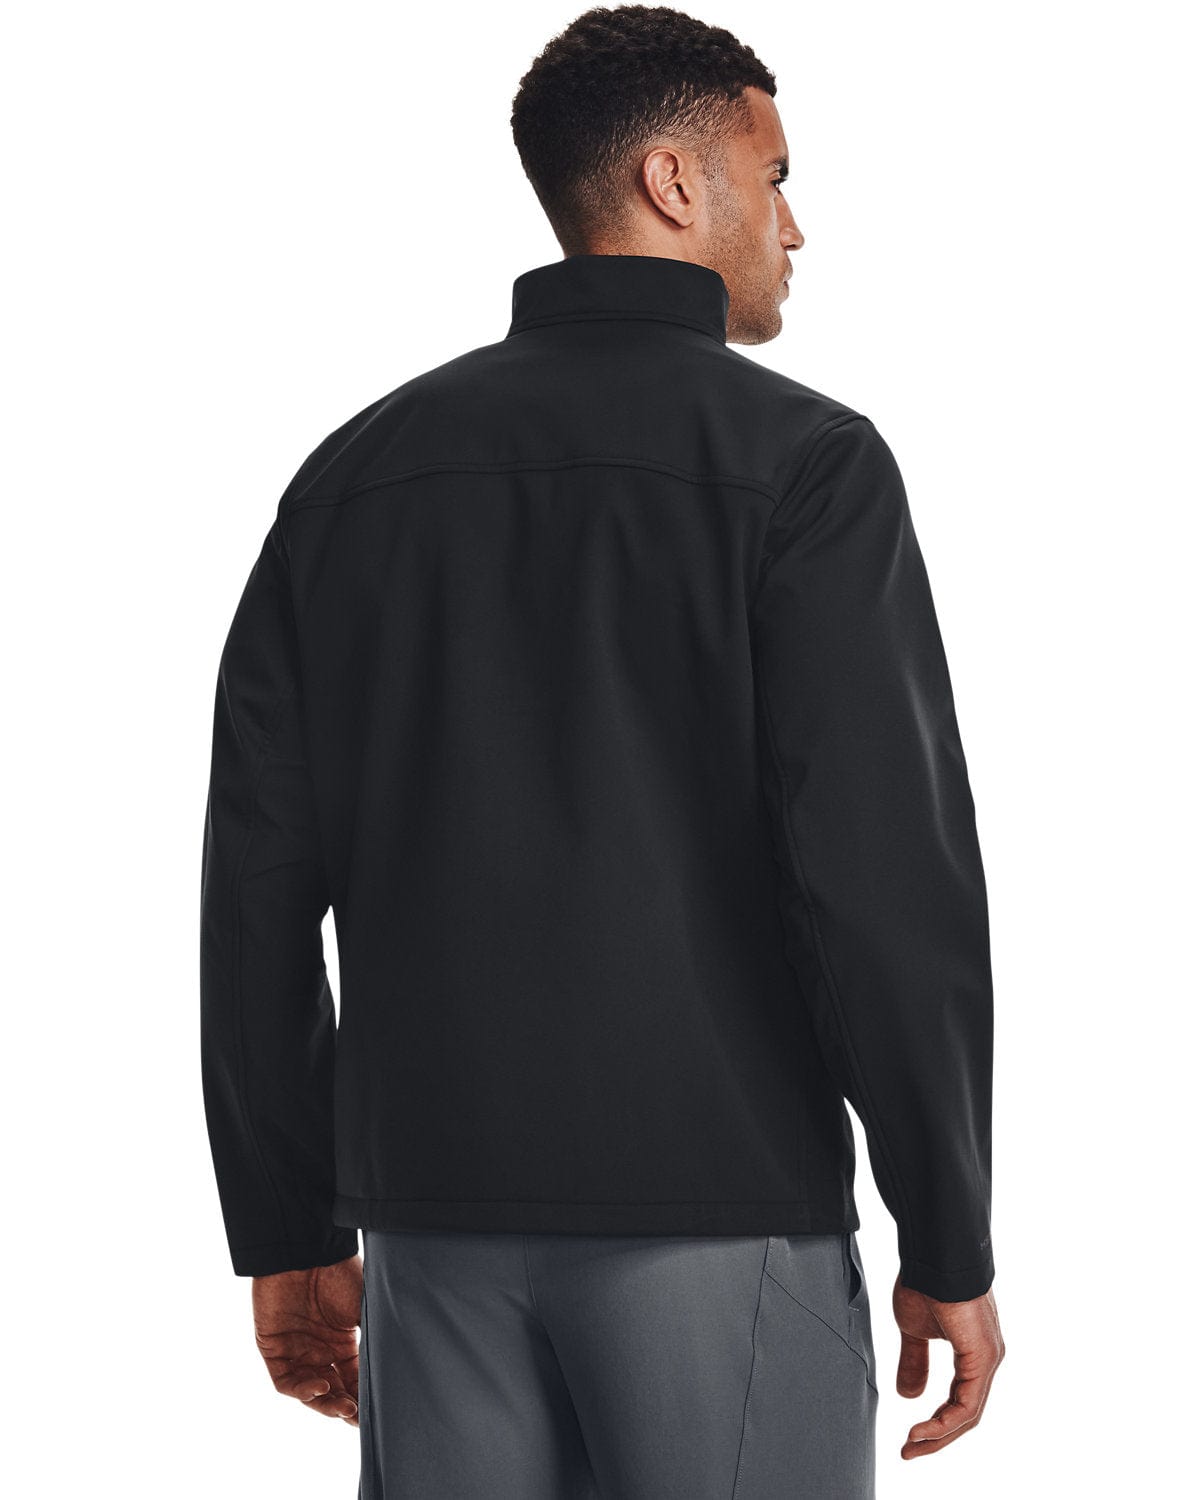 Under Armour ColdGear Infrared Shield Jacket Black / Small